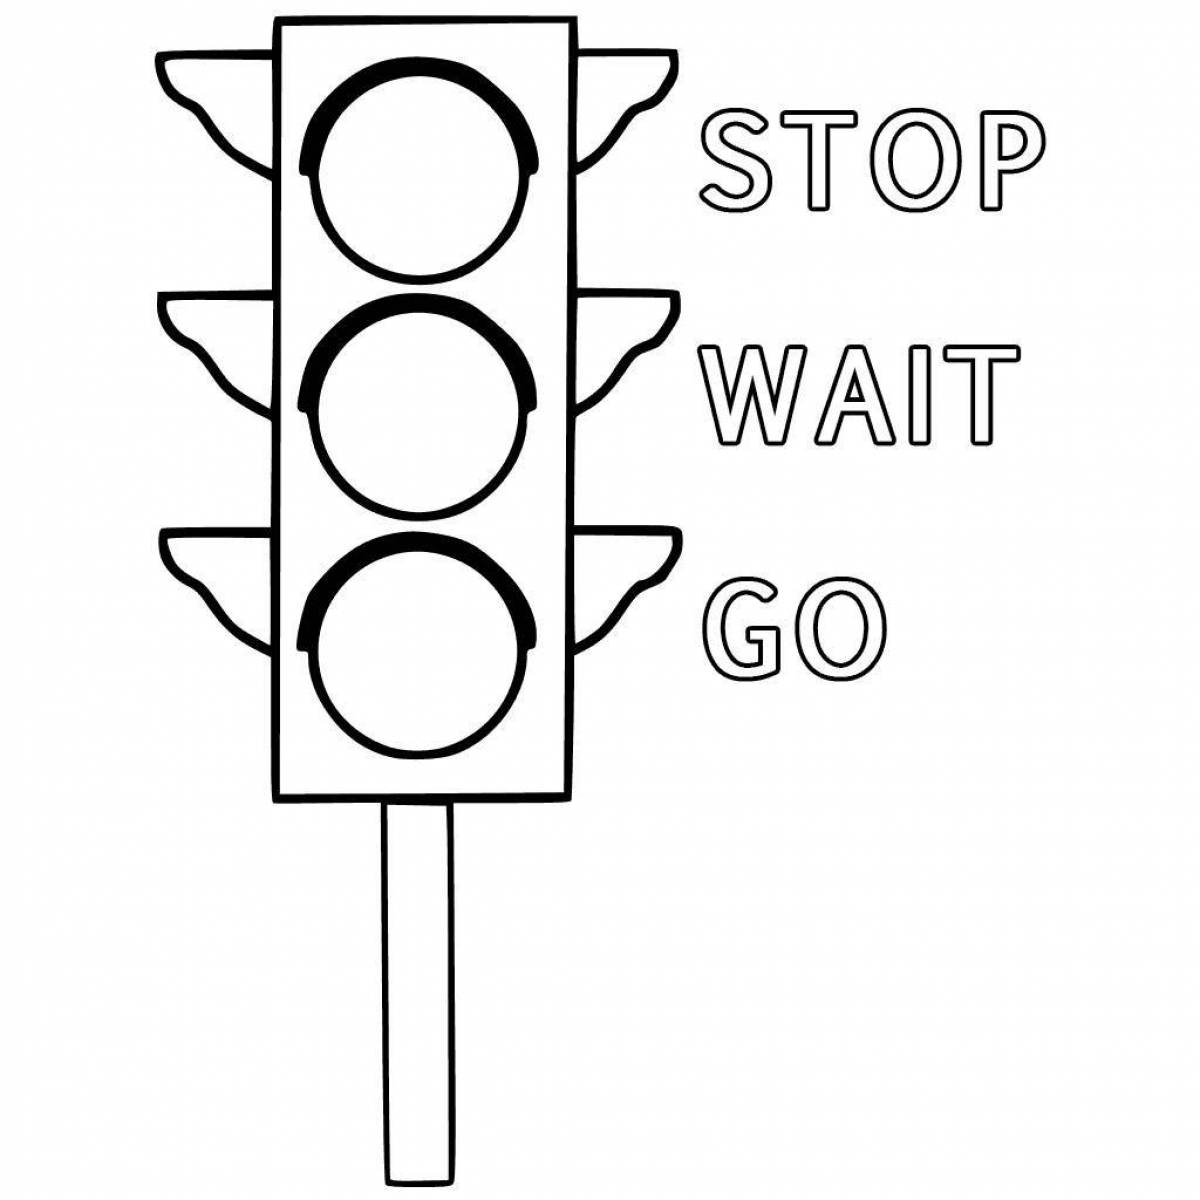 Traffic light picture for kids #5